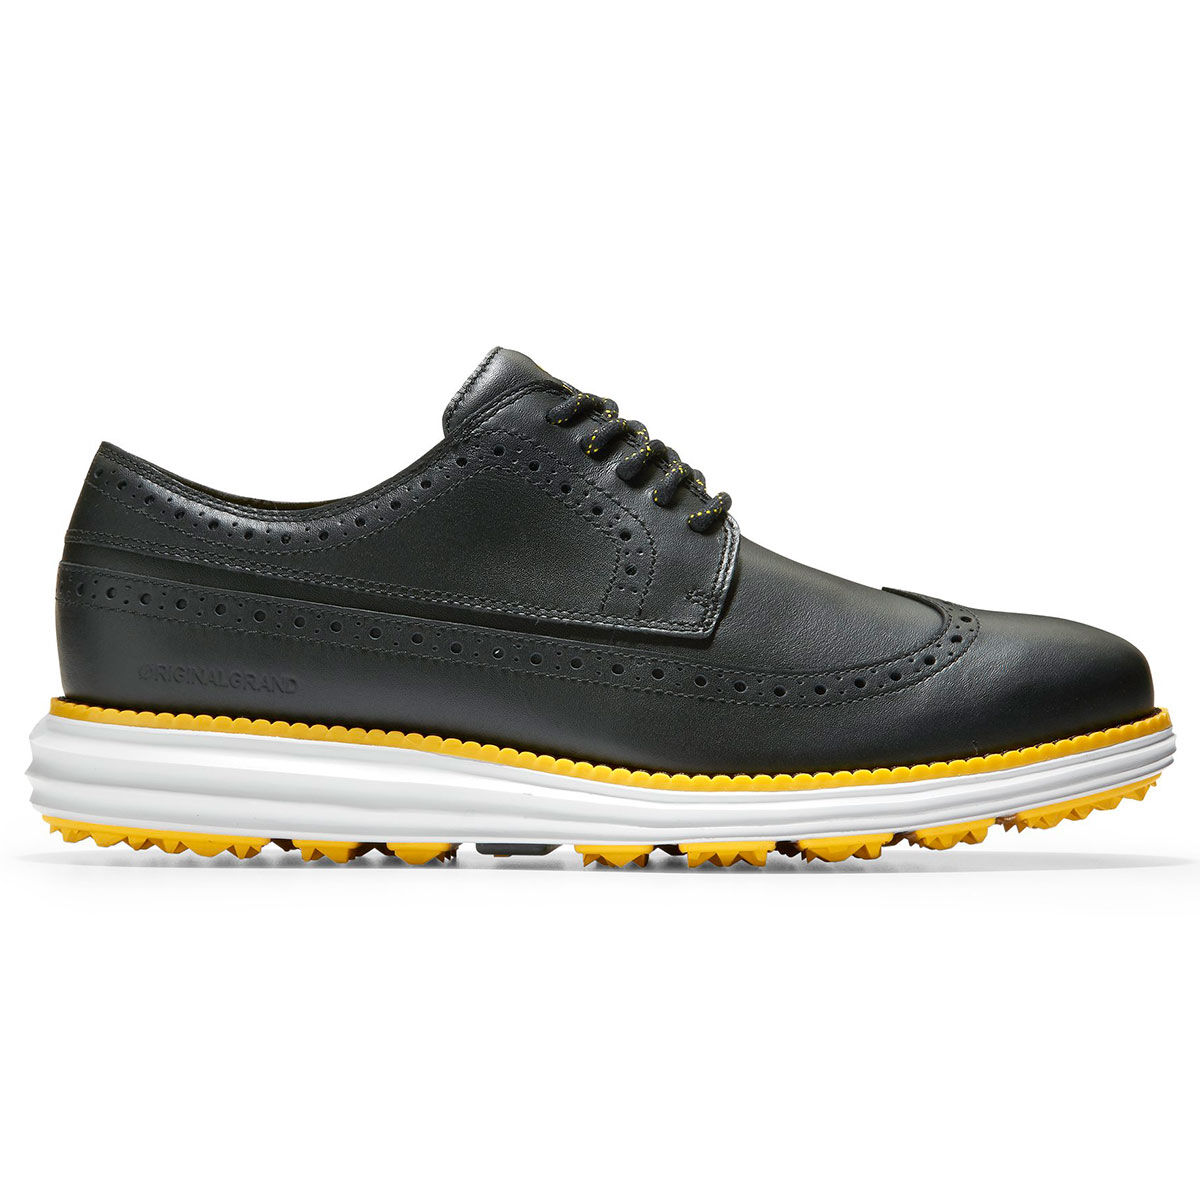 Cole Haan Mens Black and White OriginalGrand Wing Oxford Golf Shoes, Size: 7 | American Golf